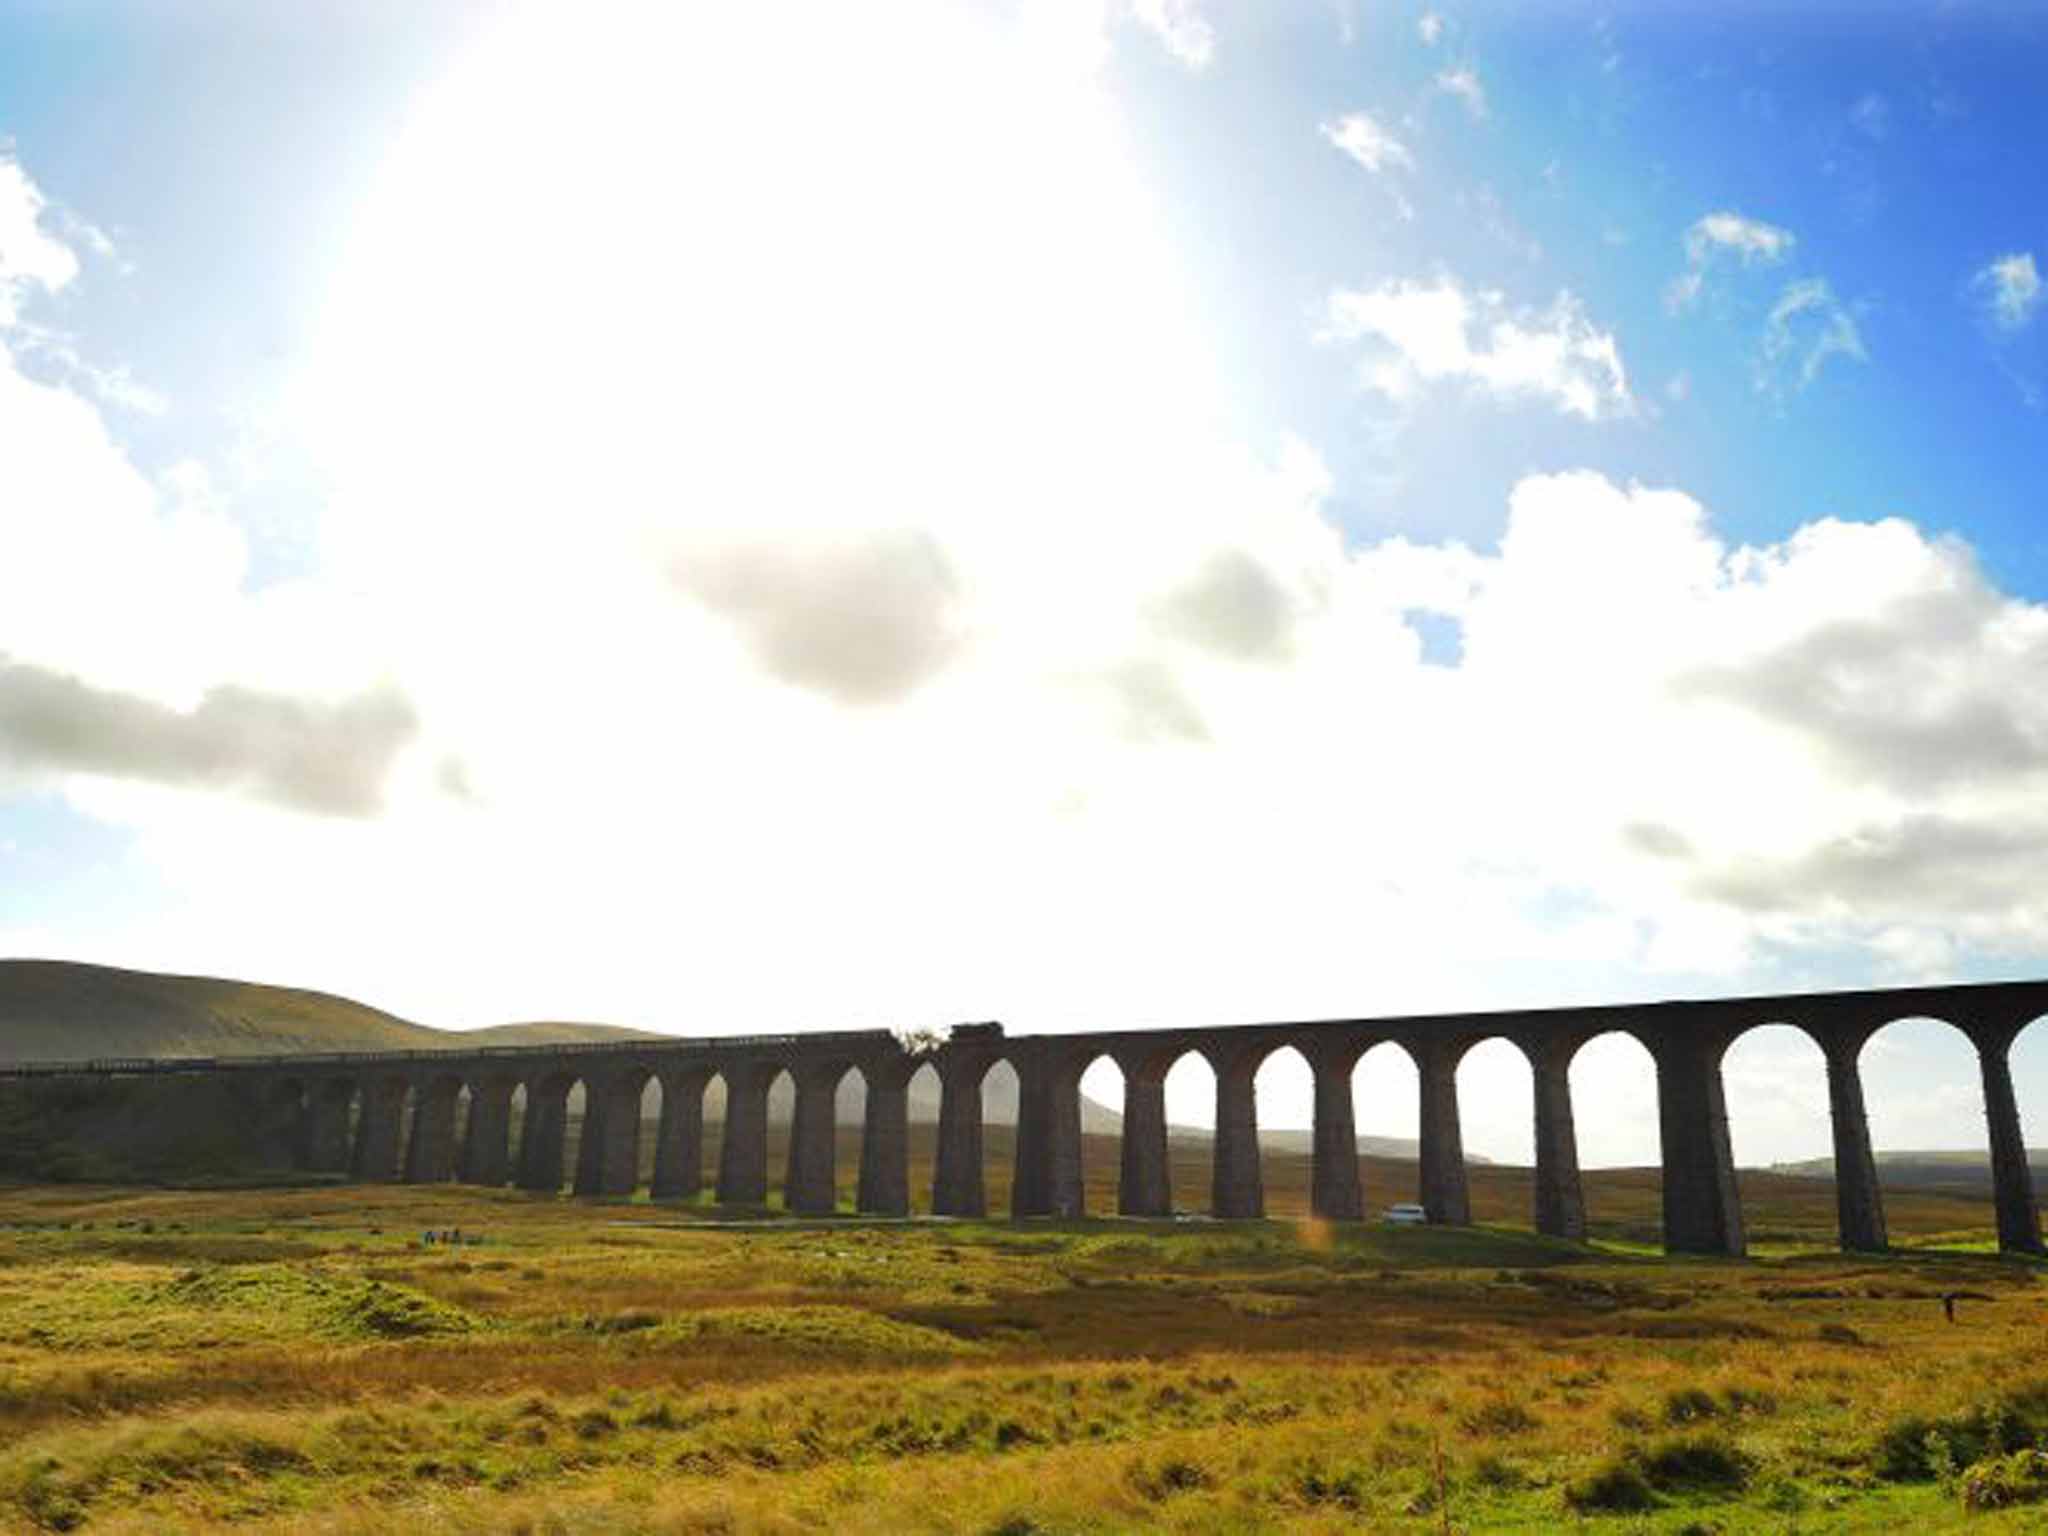 On a high: the 24-arch Ribblehead Viaduct symbolises this scenic railway